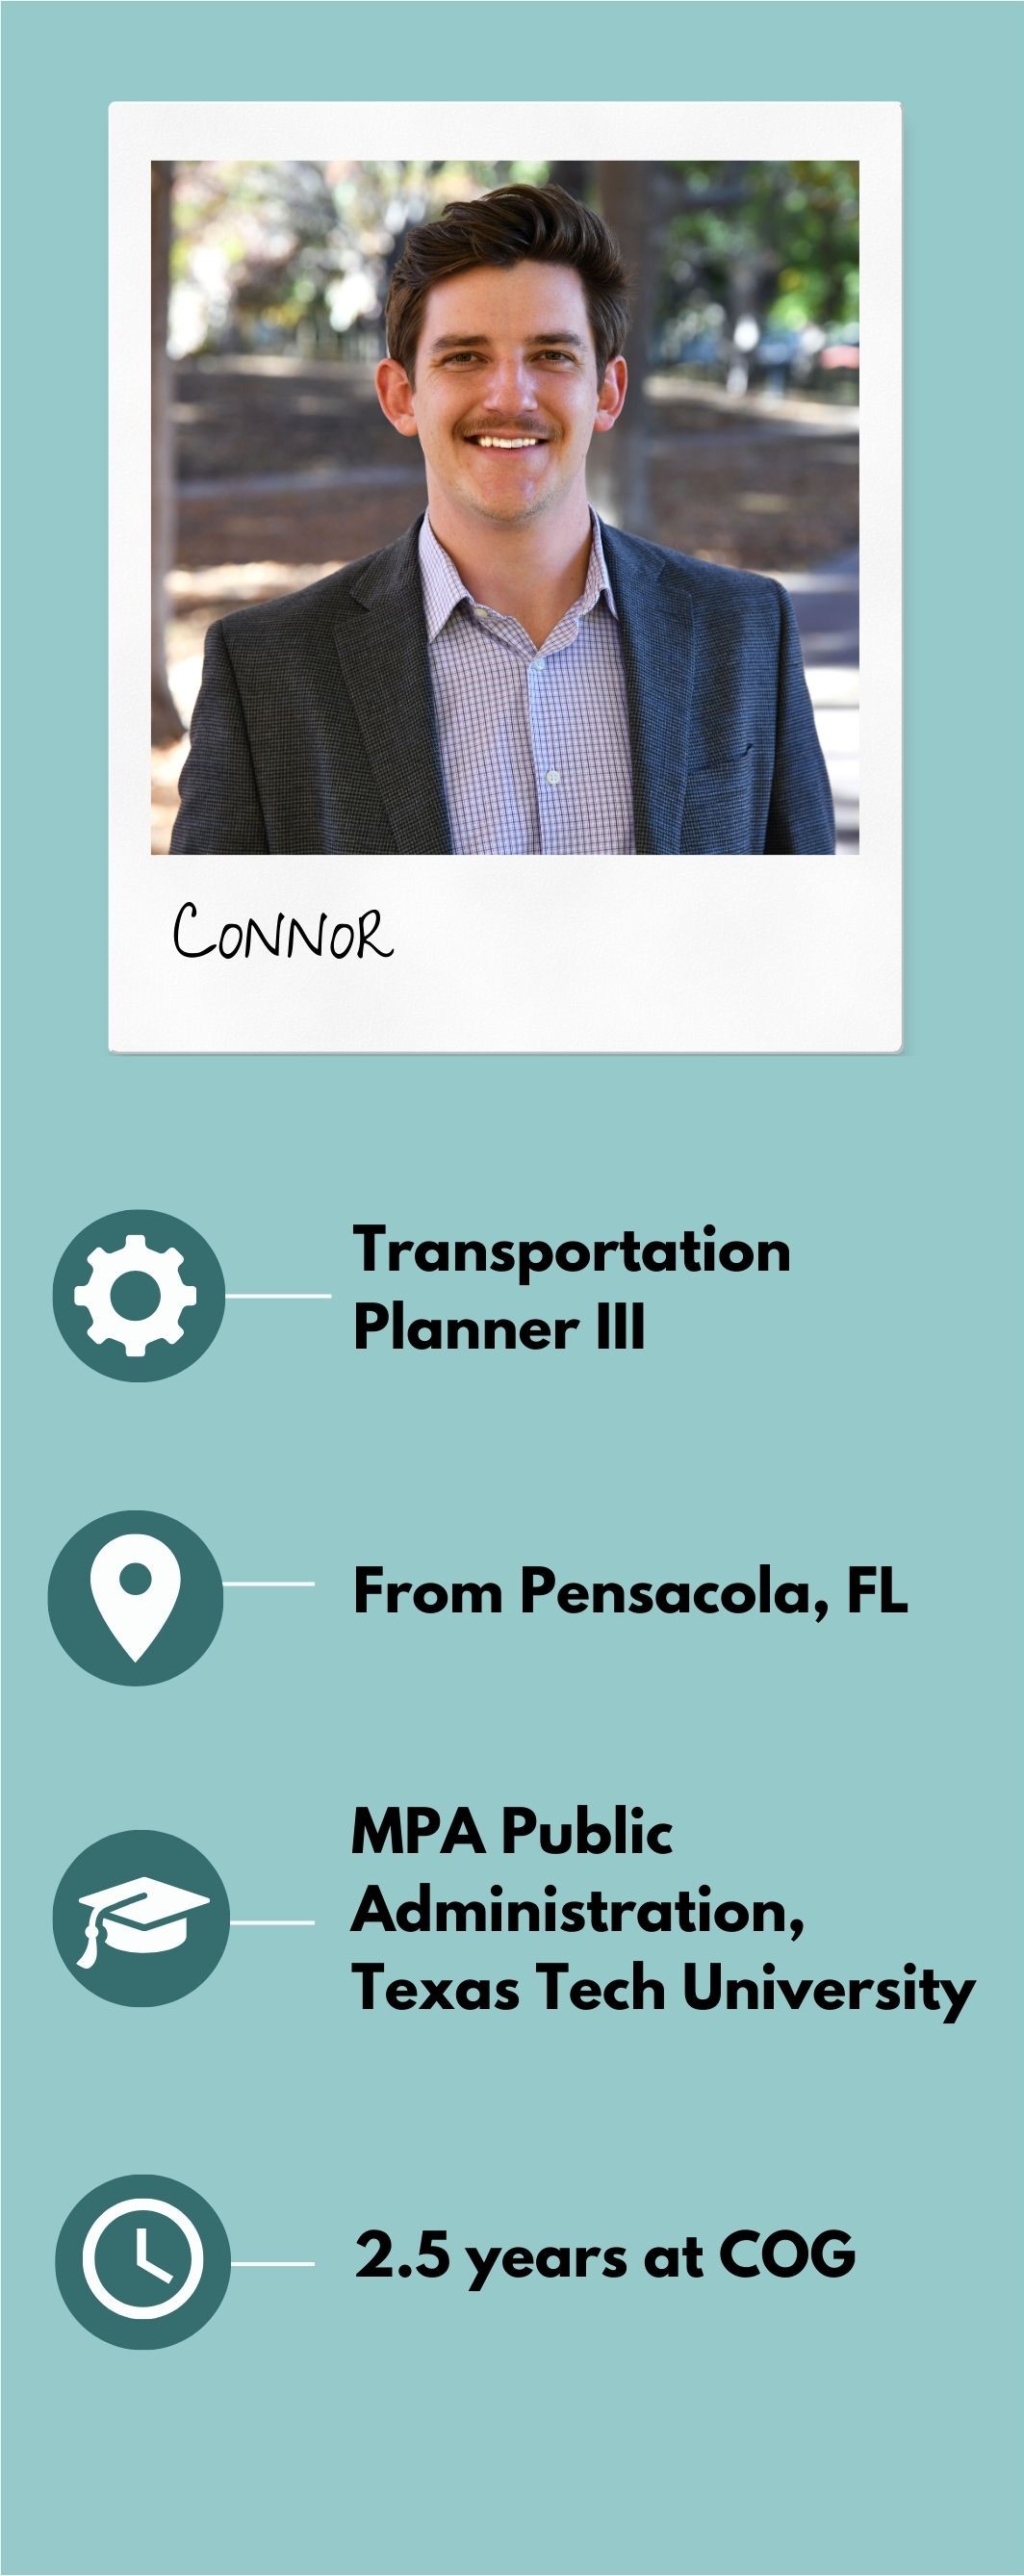 Photo of Connor Sadro- Transportation Planner at NCTCOG